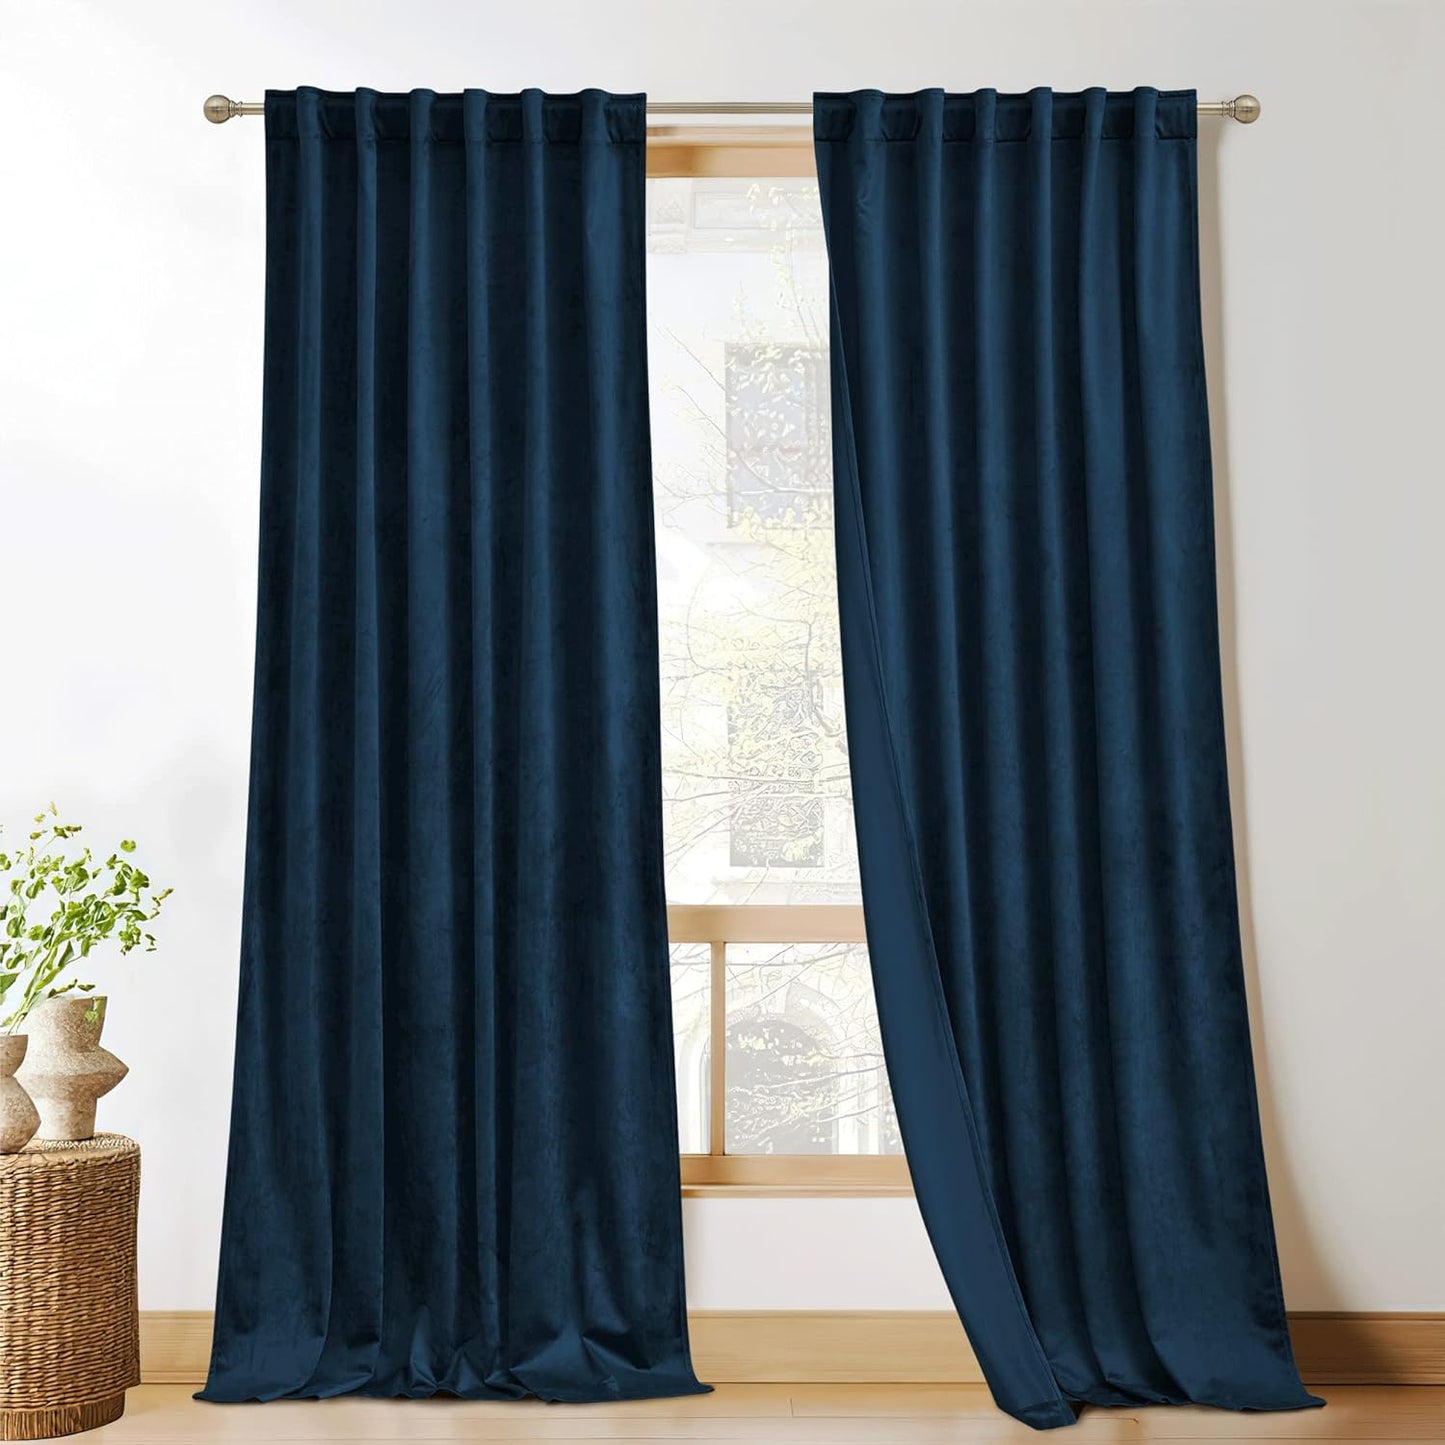 KGORGE Green Velvet Curtains 84 Inches Super Soft Room Darkening Thermal Insulating Window Curtains & Drapes for Bedroom Living Room Backdrop Holiday Christmas Decor, Hunter Green, W 52 X L 84, 2 Pcs  KGORGE Navy Blue W 52 X L 96 